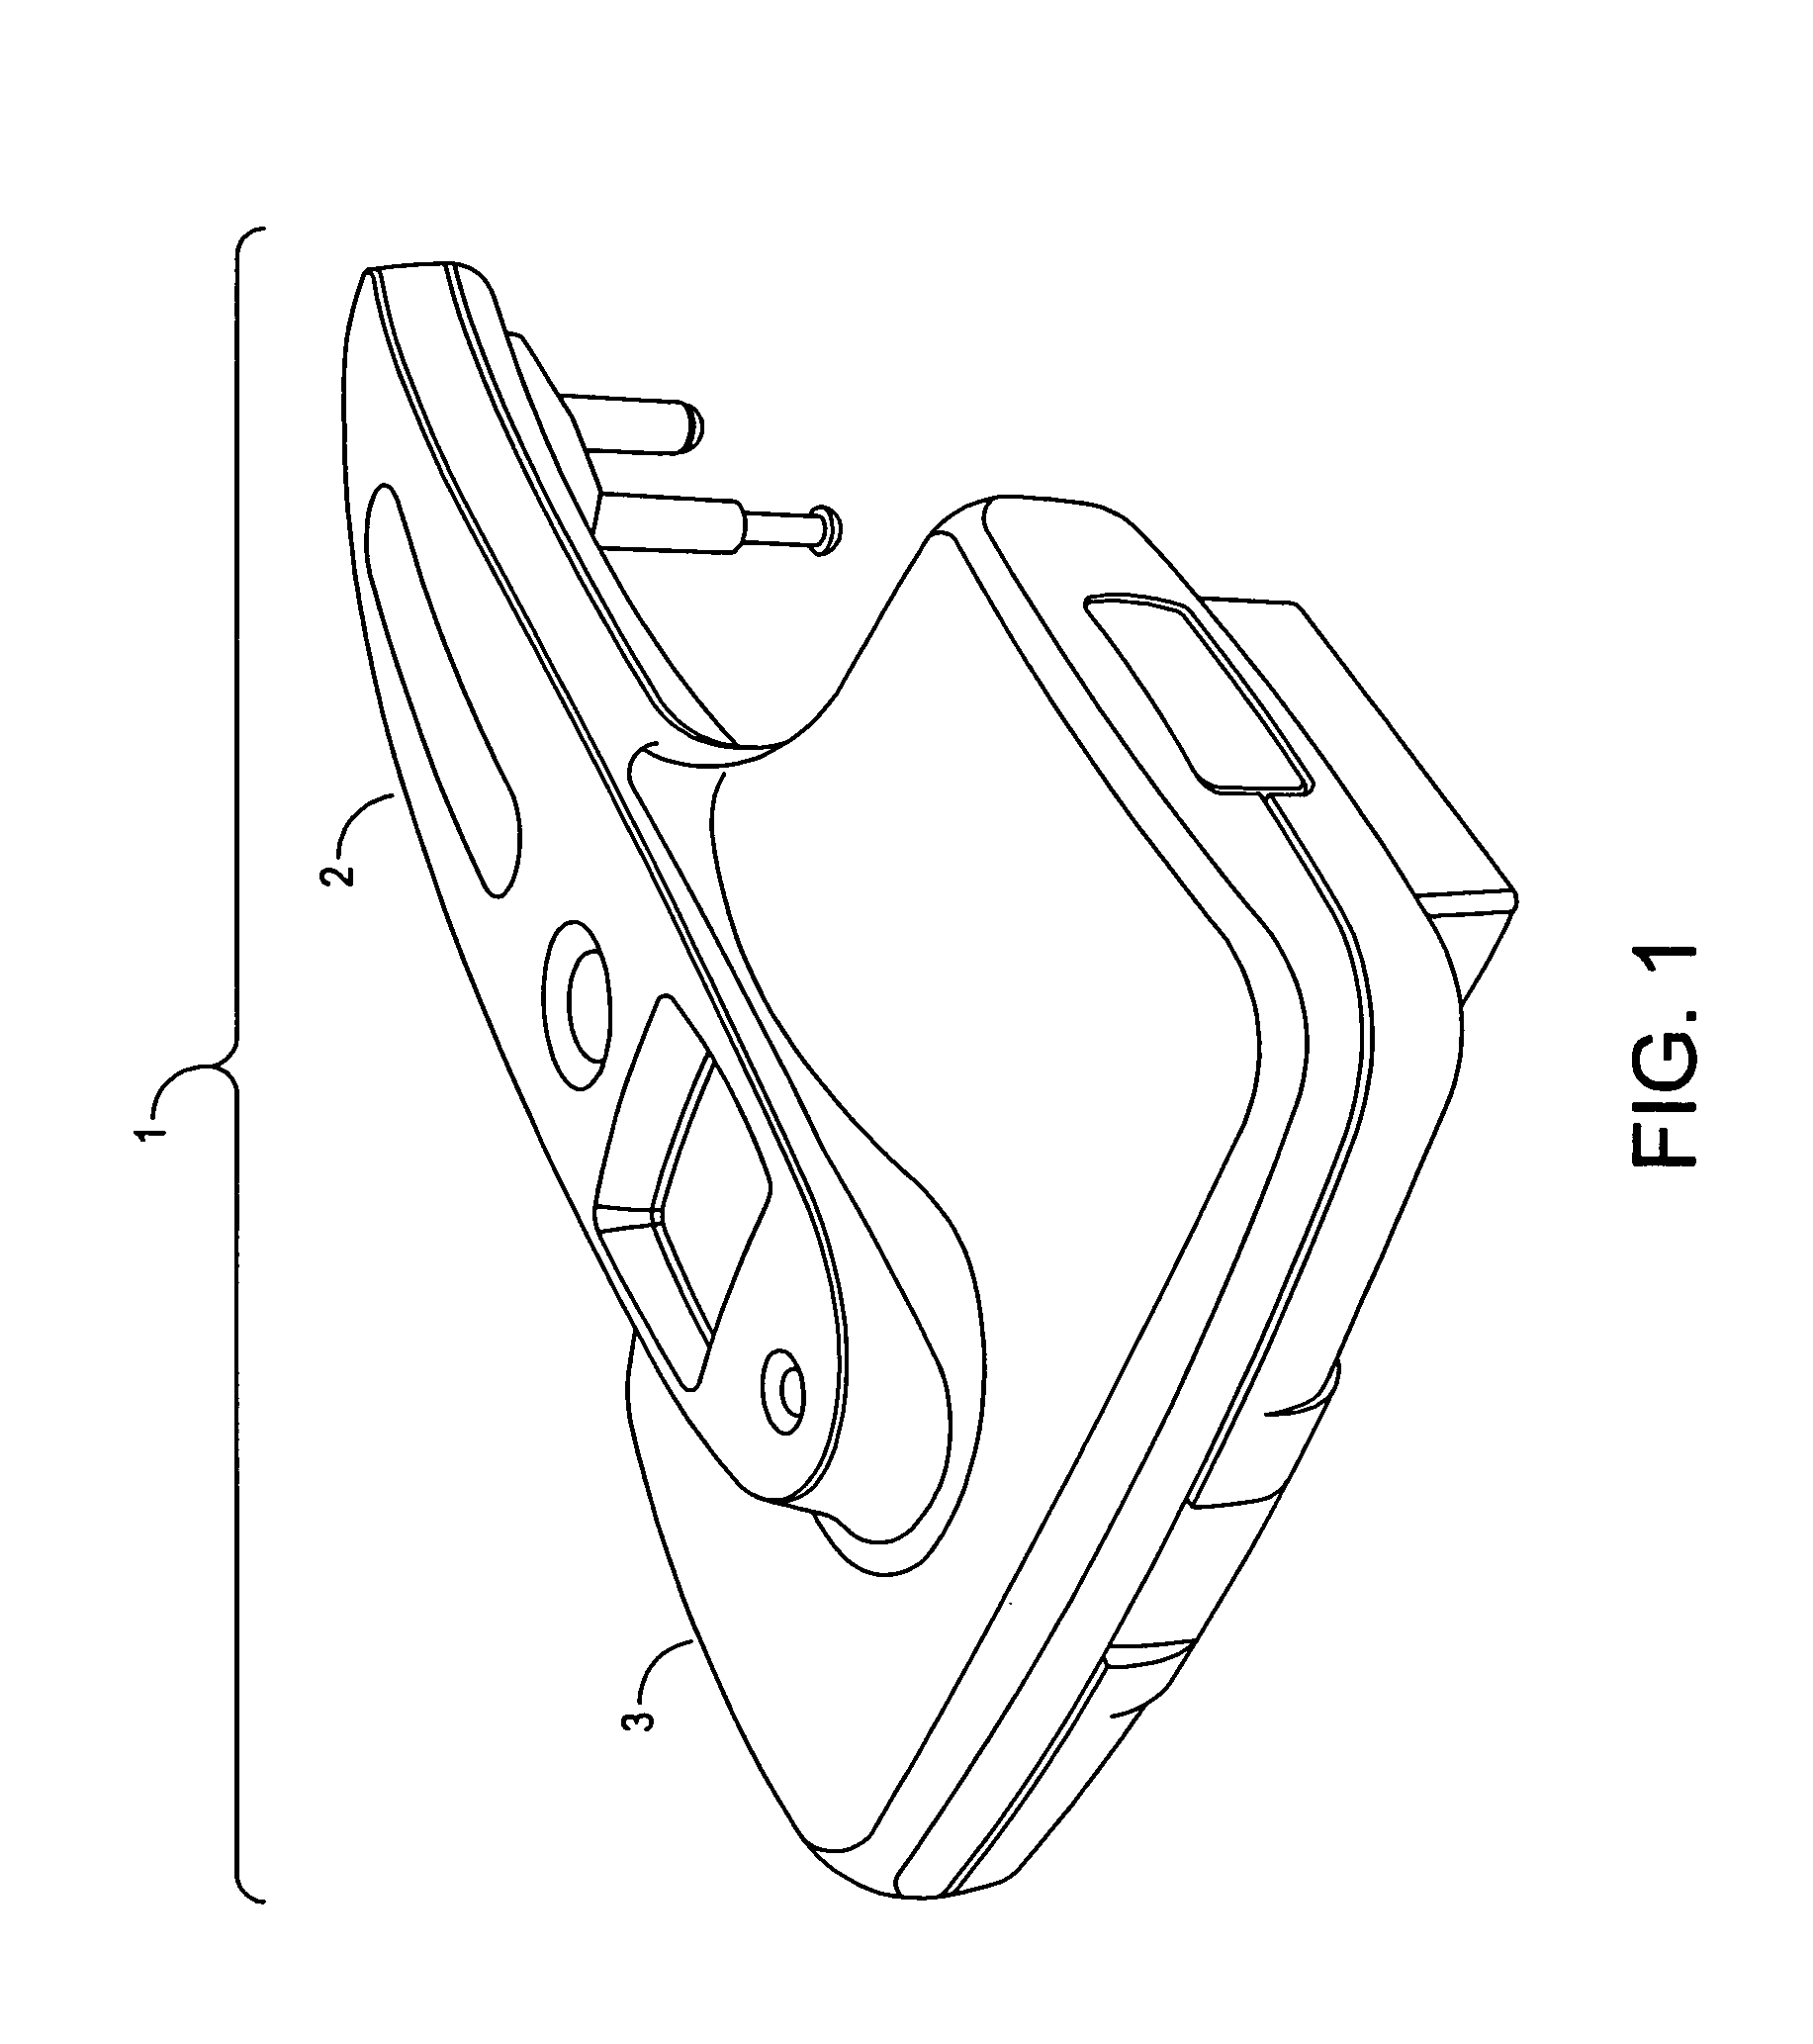 Apparatus and method for the automated measurement of sural nerve conduction velocity and amplitude